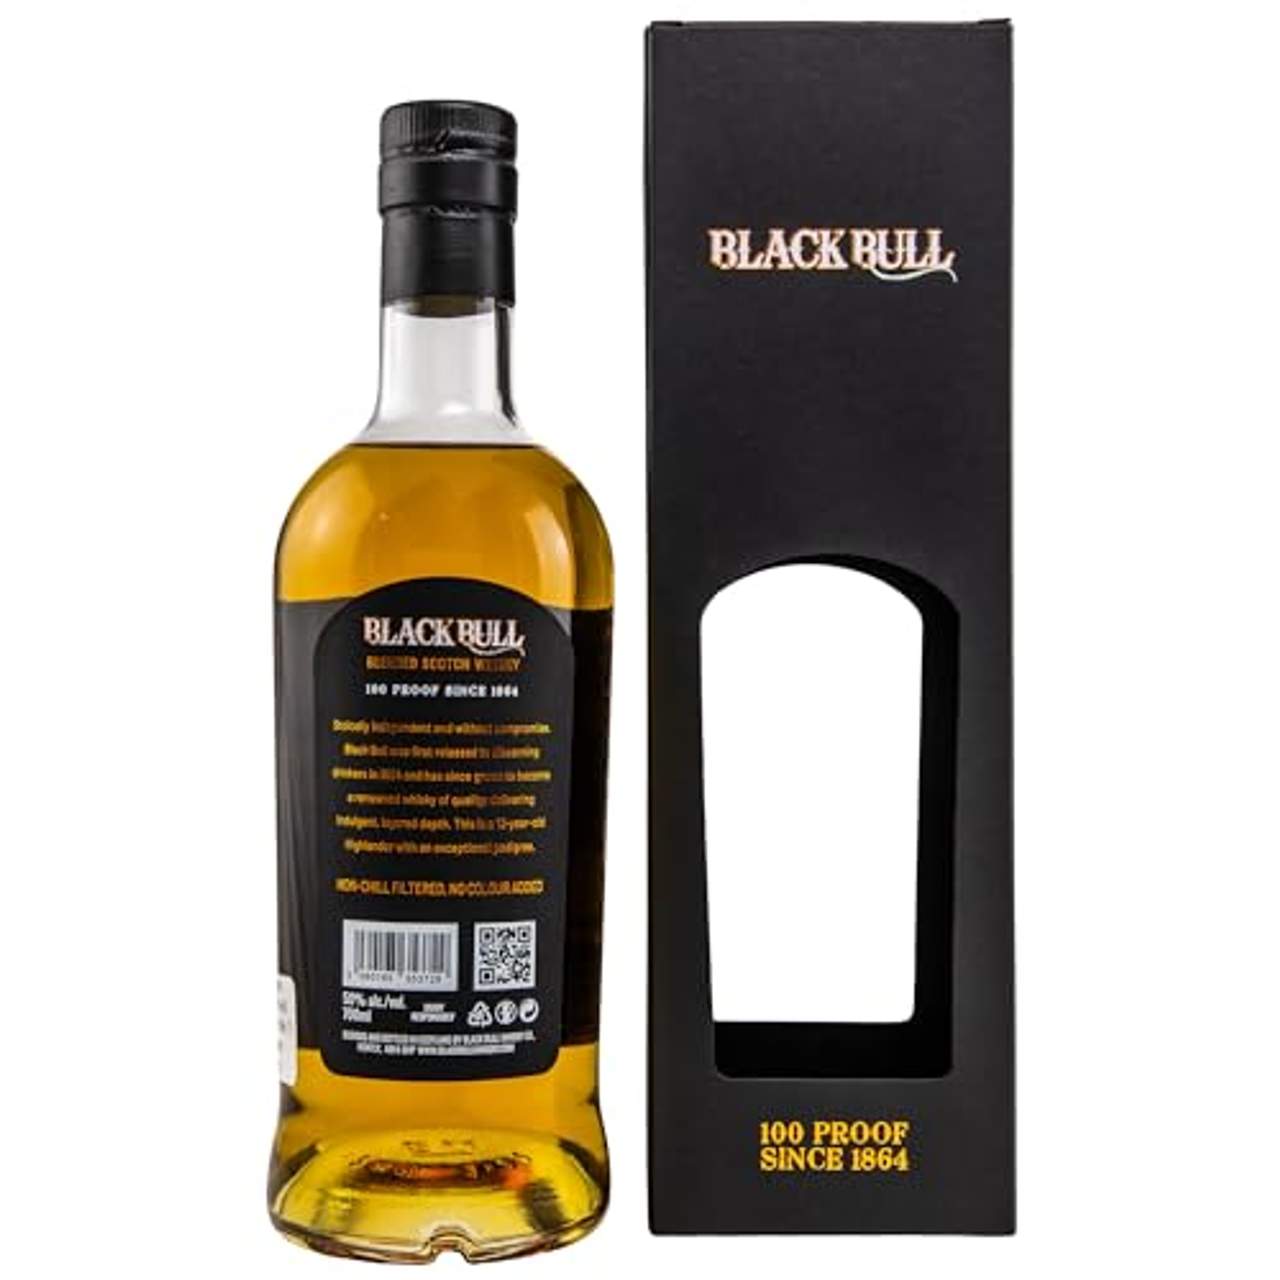 Black Bull 12 Years Old Duncan Taylor Blended Scotch Whisky